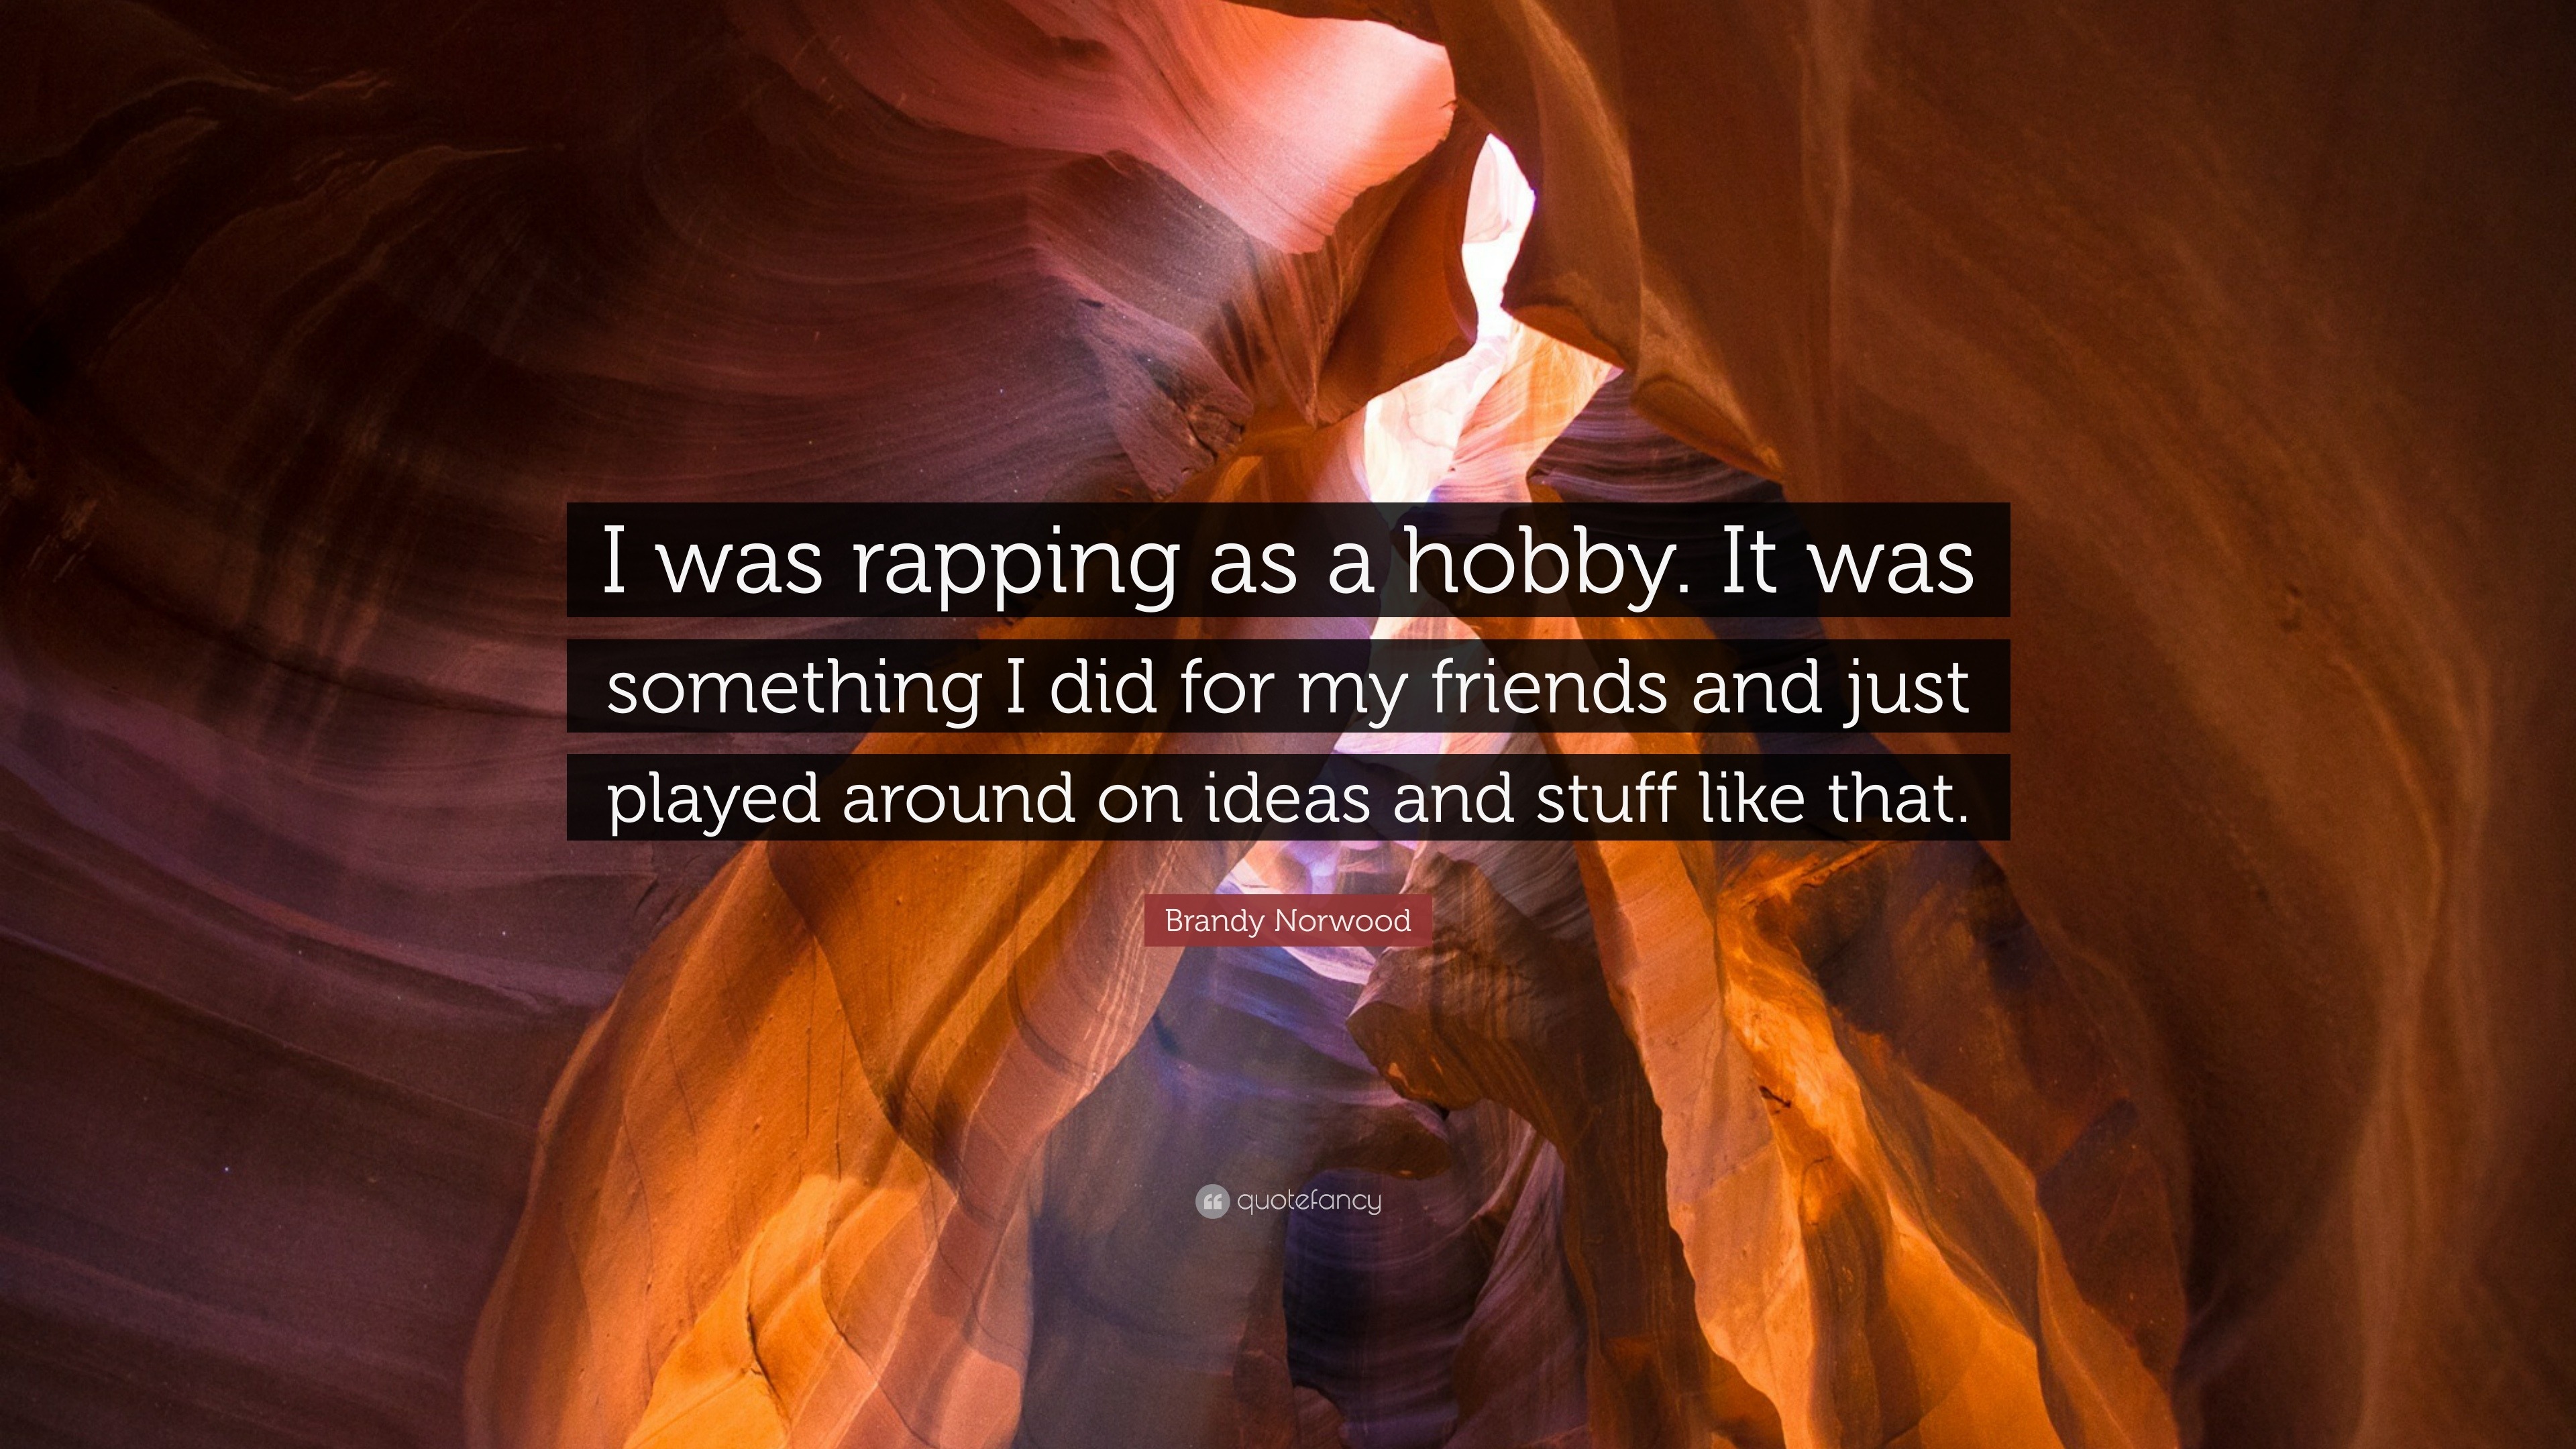 Brandy Norwood Quote: “I was rapping as a hobby. It was something I did for  my